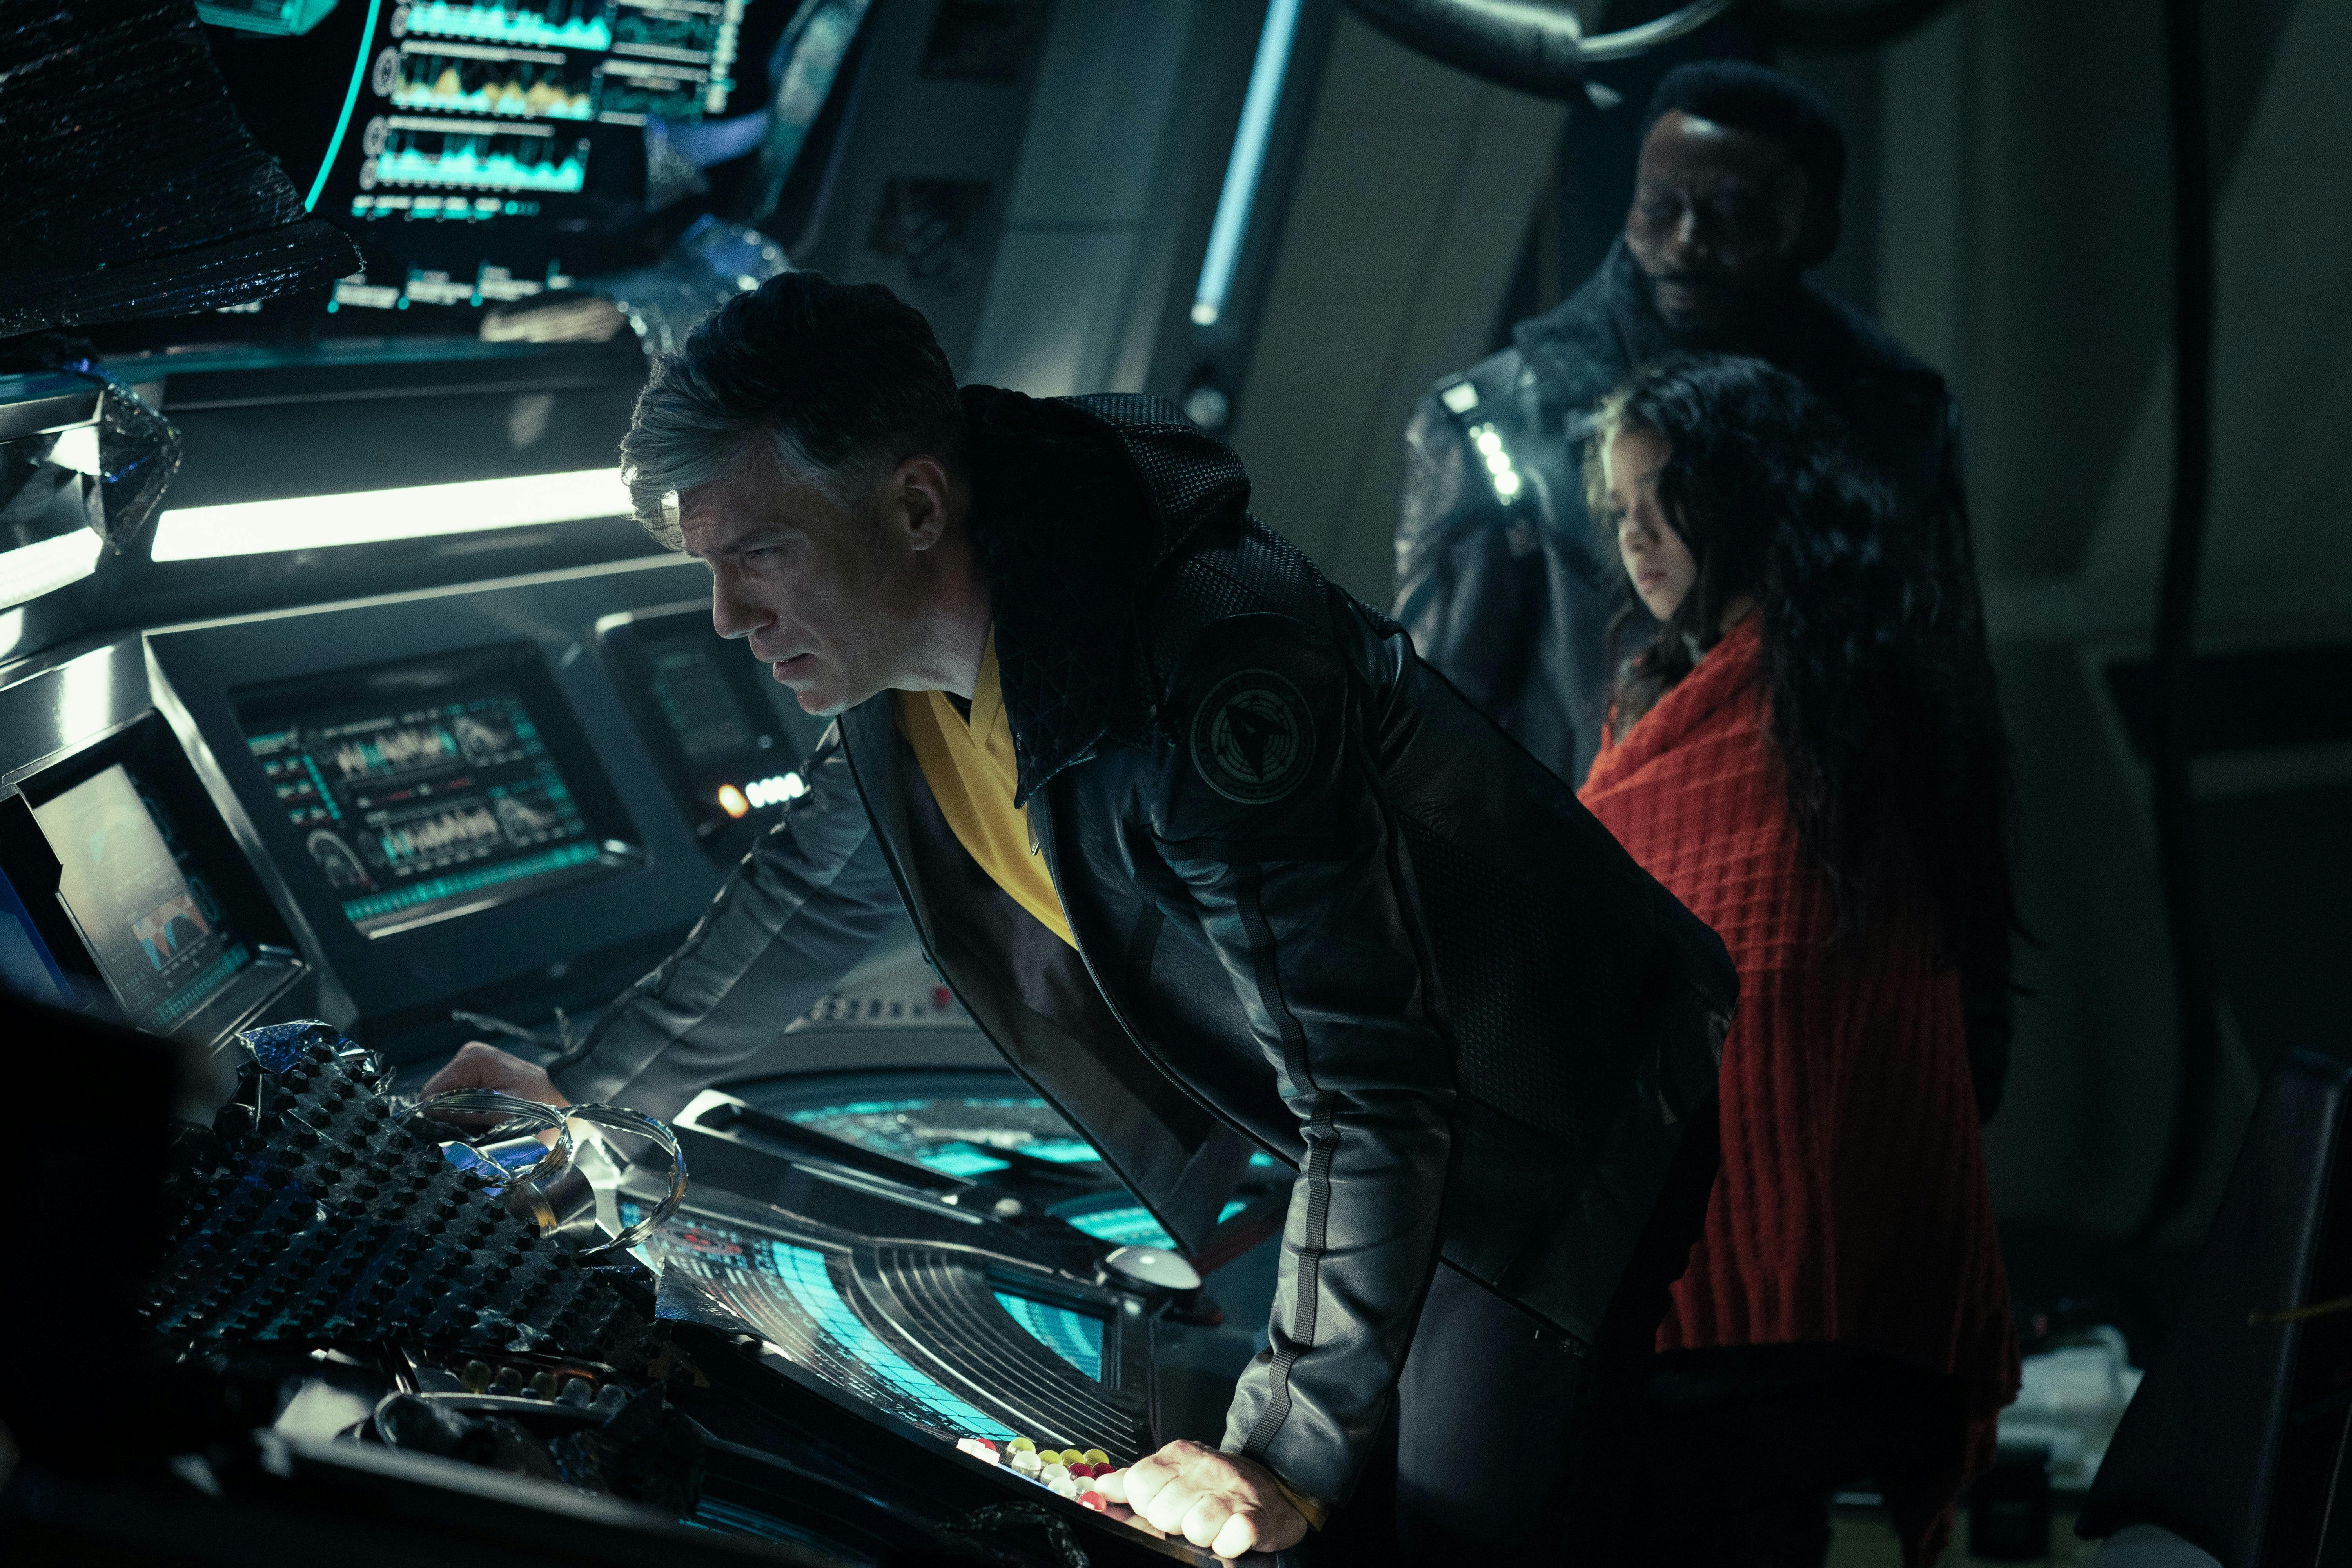 Captain Pike (Anson Mount) leans over a console. Next to him, a young woman wearing red and Dr. M'Benga (Babs Olusanmokun) stand watching him.